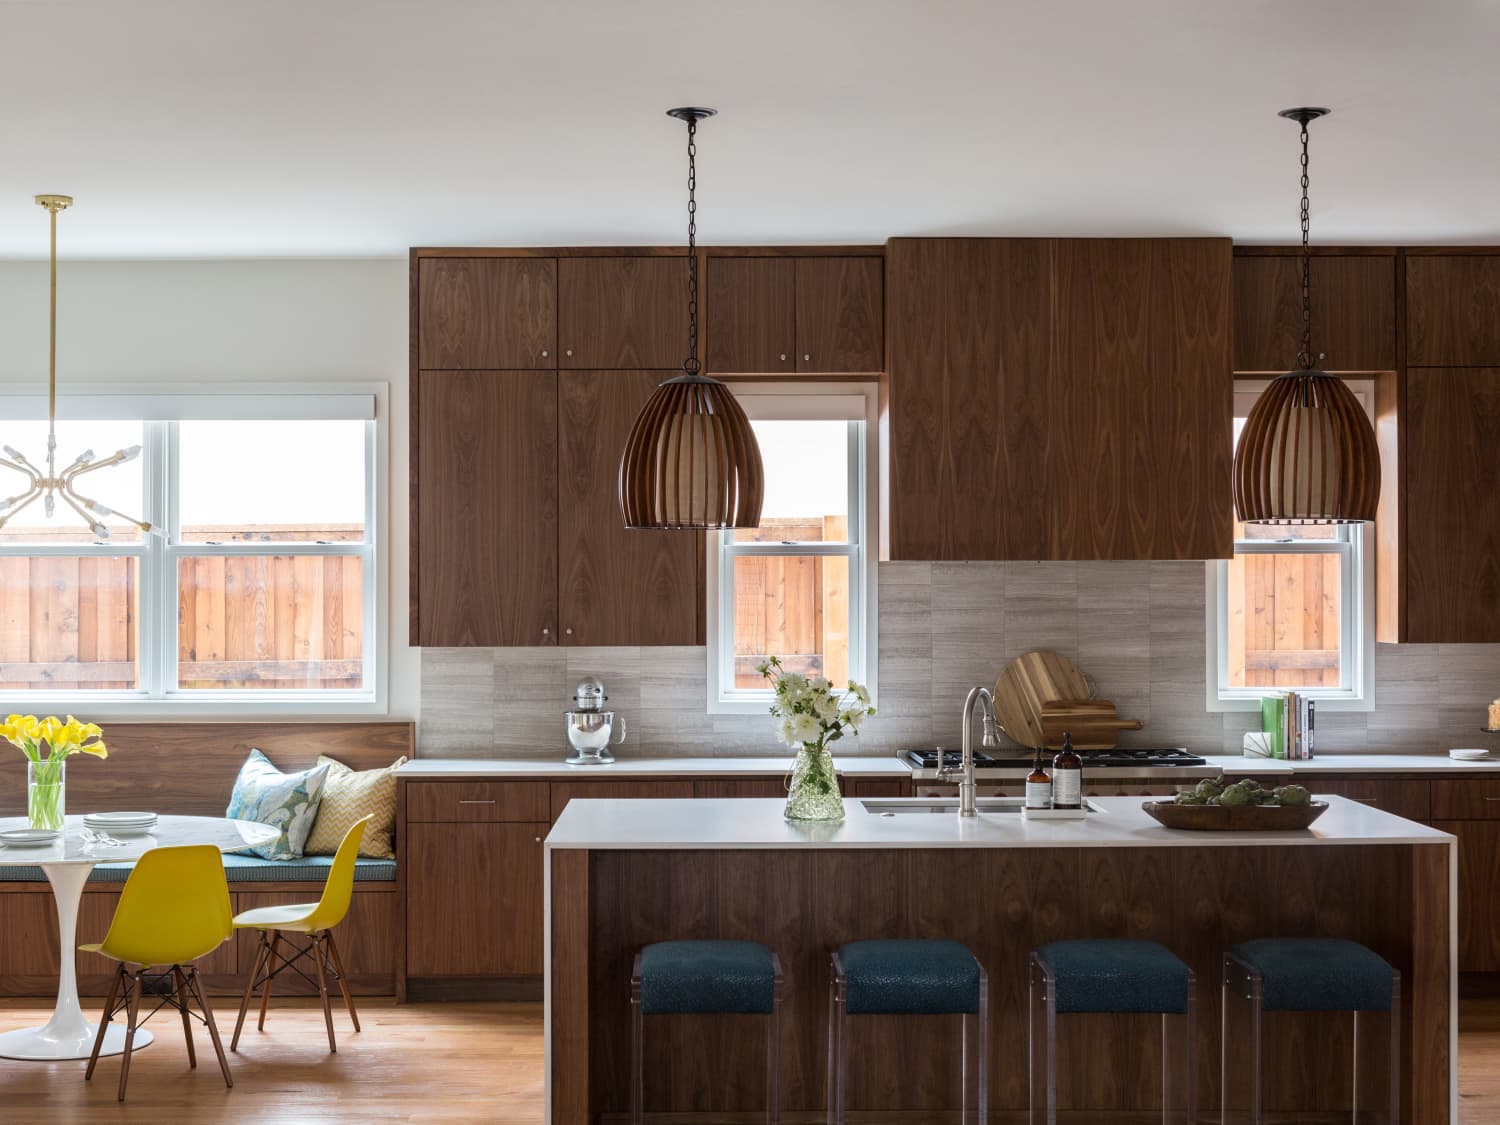 The Best and Most Popular Kitchen Trends for in 20, According to ...